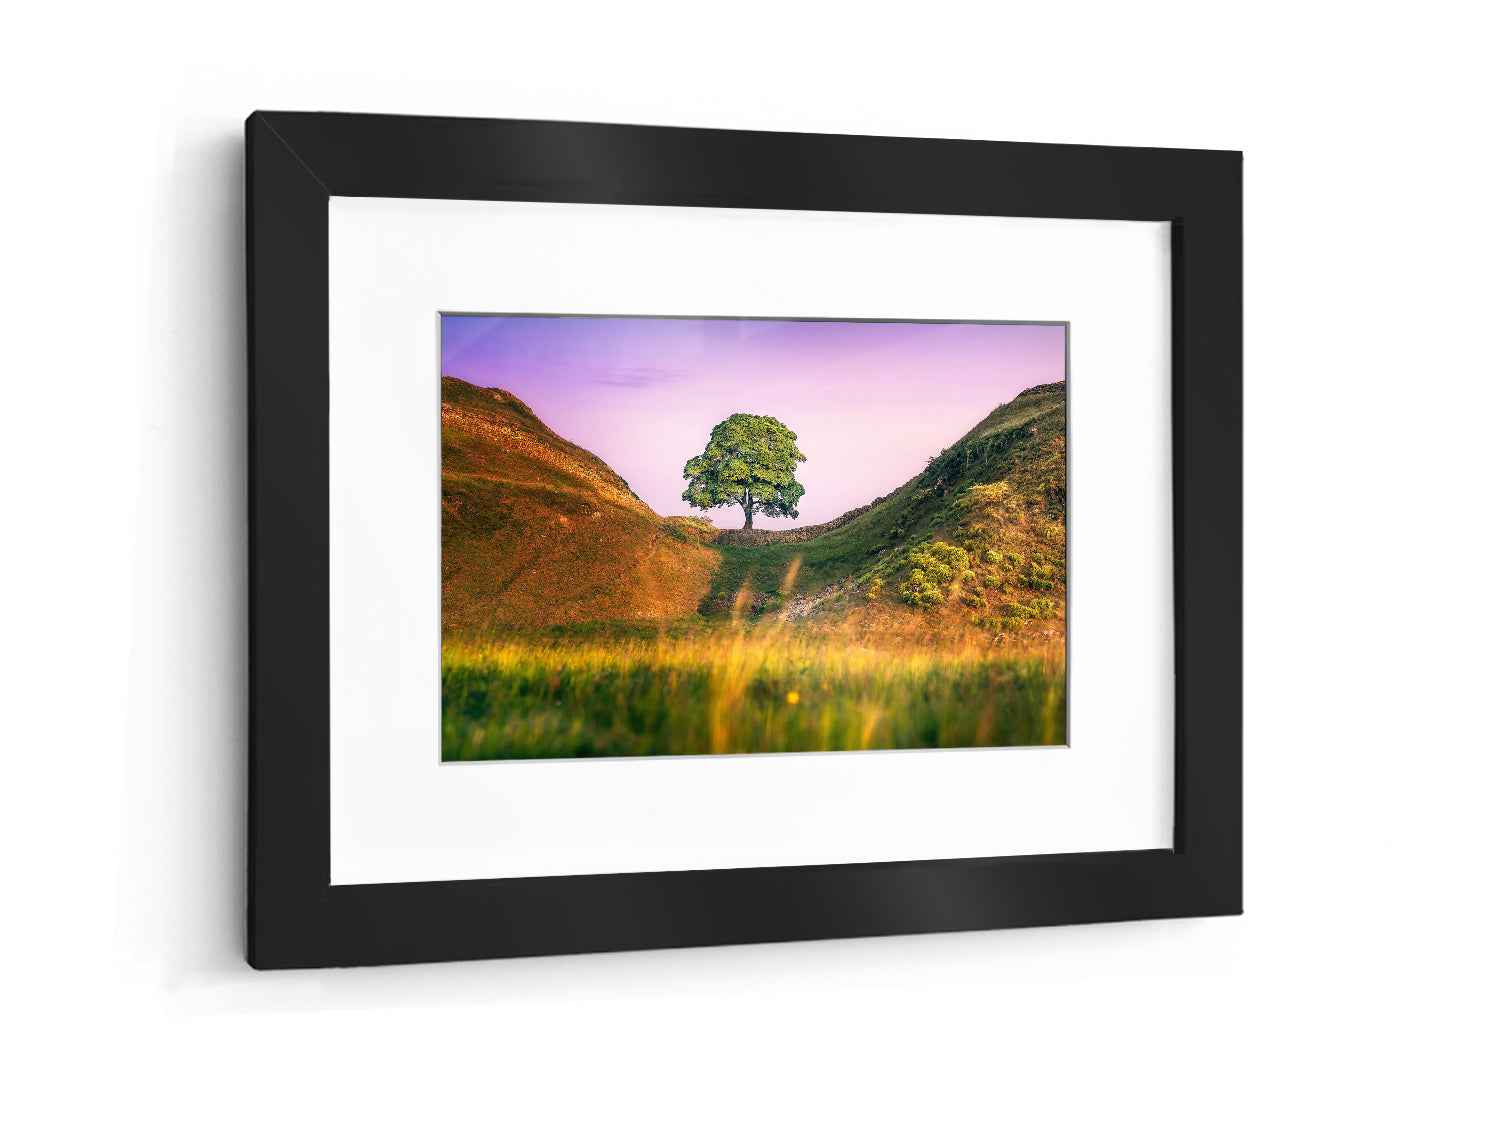 Sycamore gap's "Bliss"